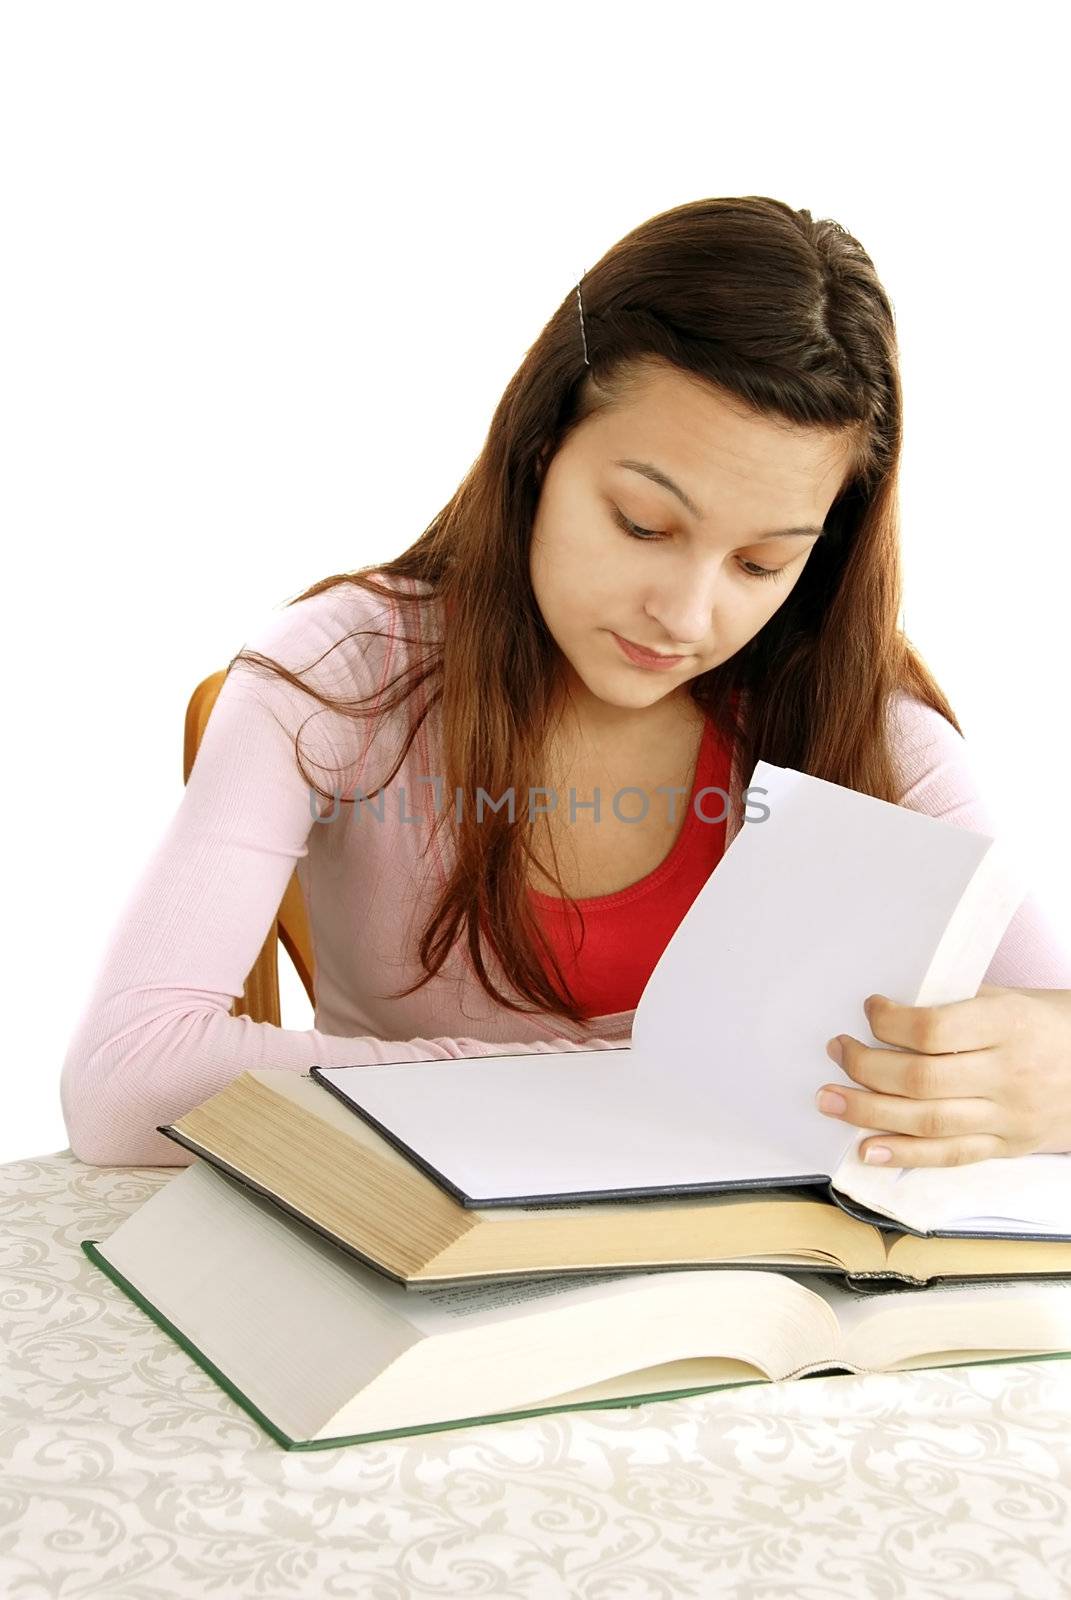 teenage girl portrait with opened books, looking how much she needs to read, learning